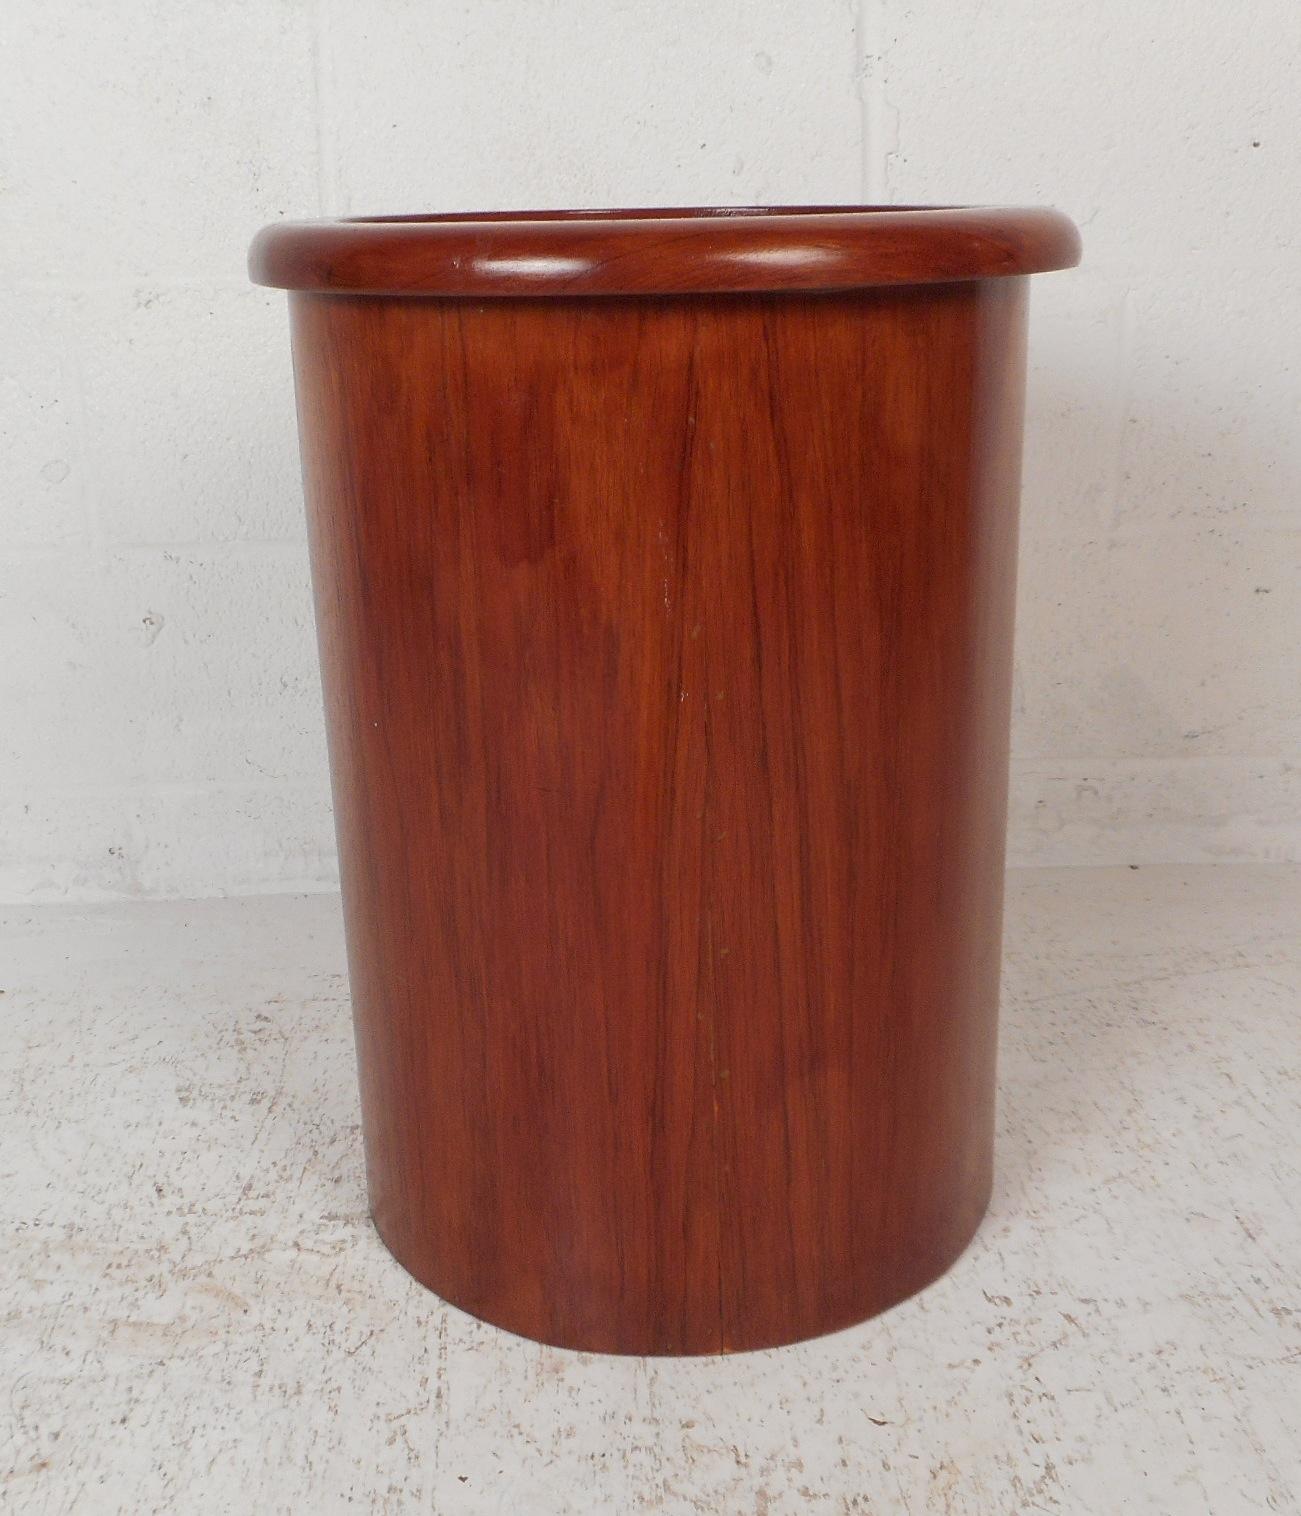 This beautiful vintage modern side table has a cylindrical shape with smooth raised edges along the top. A versatile and stylish design that can function as a pedestal or an unusual side table. This well made piece features dovetailed construction